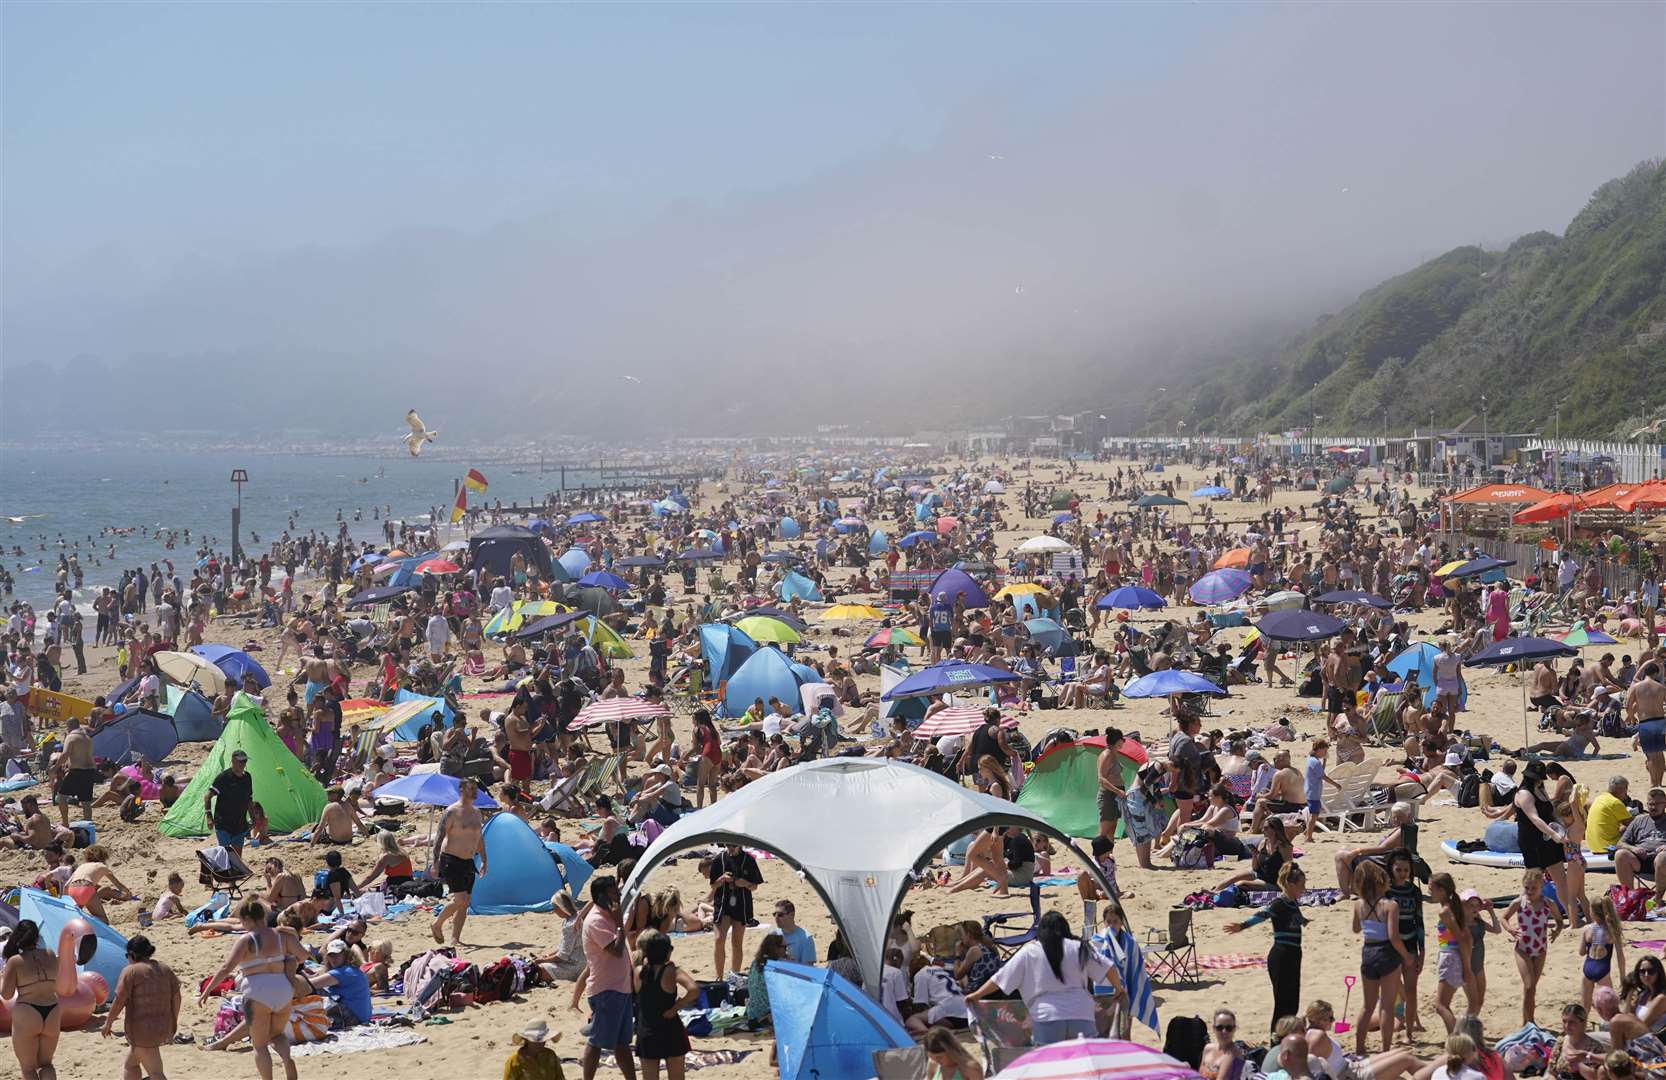 In Dorset, the sands were packed in Bournemouth, as thousands ventured to the beach with umbrellas and shelters (Andrew Matthews/PA)